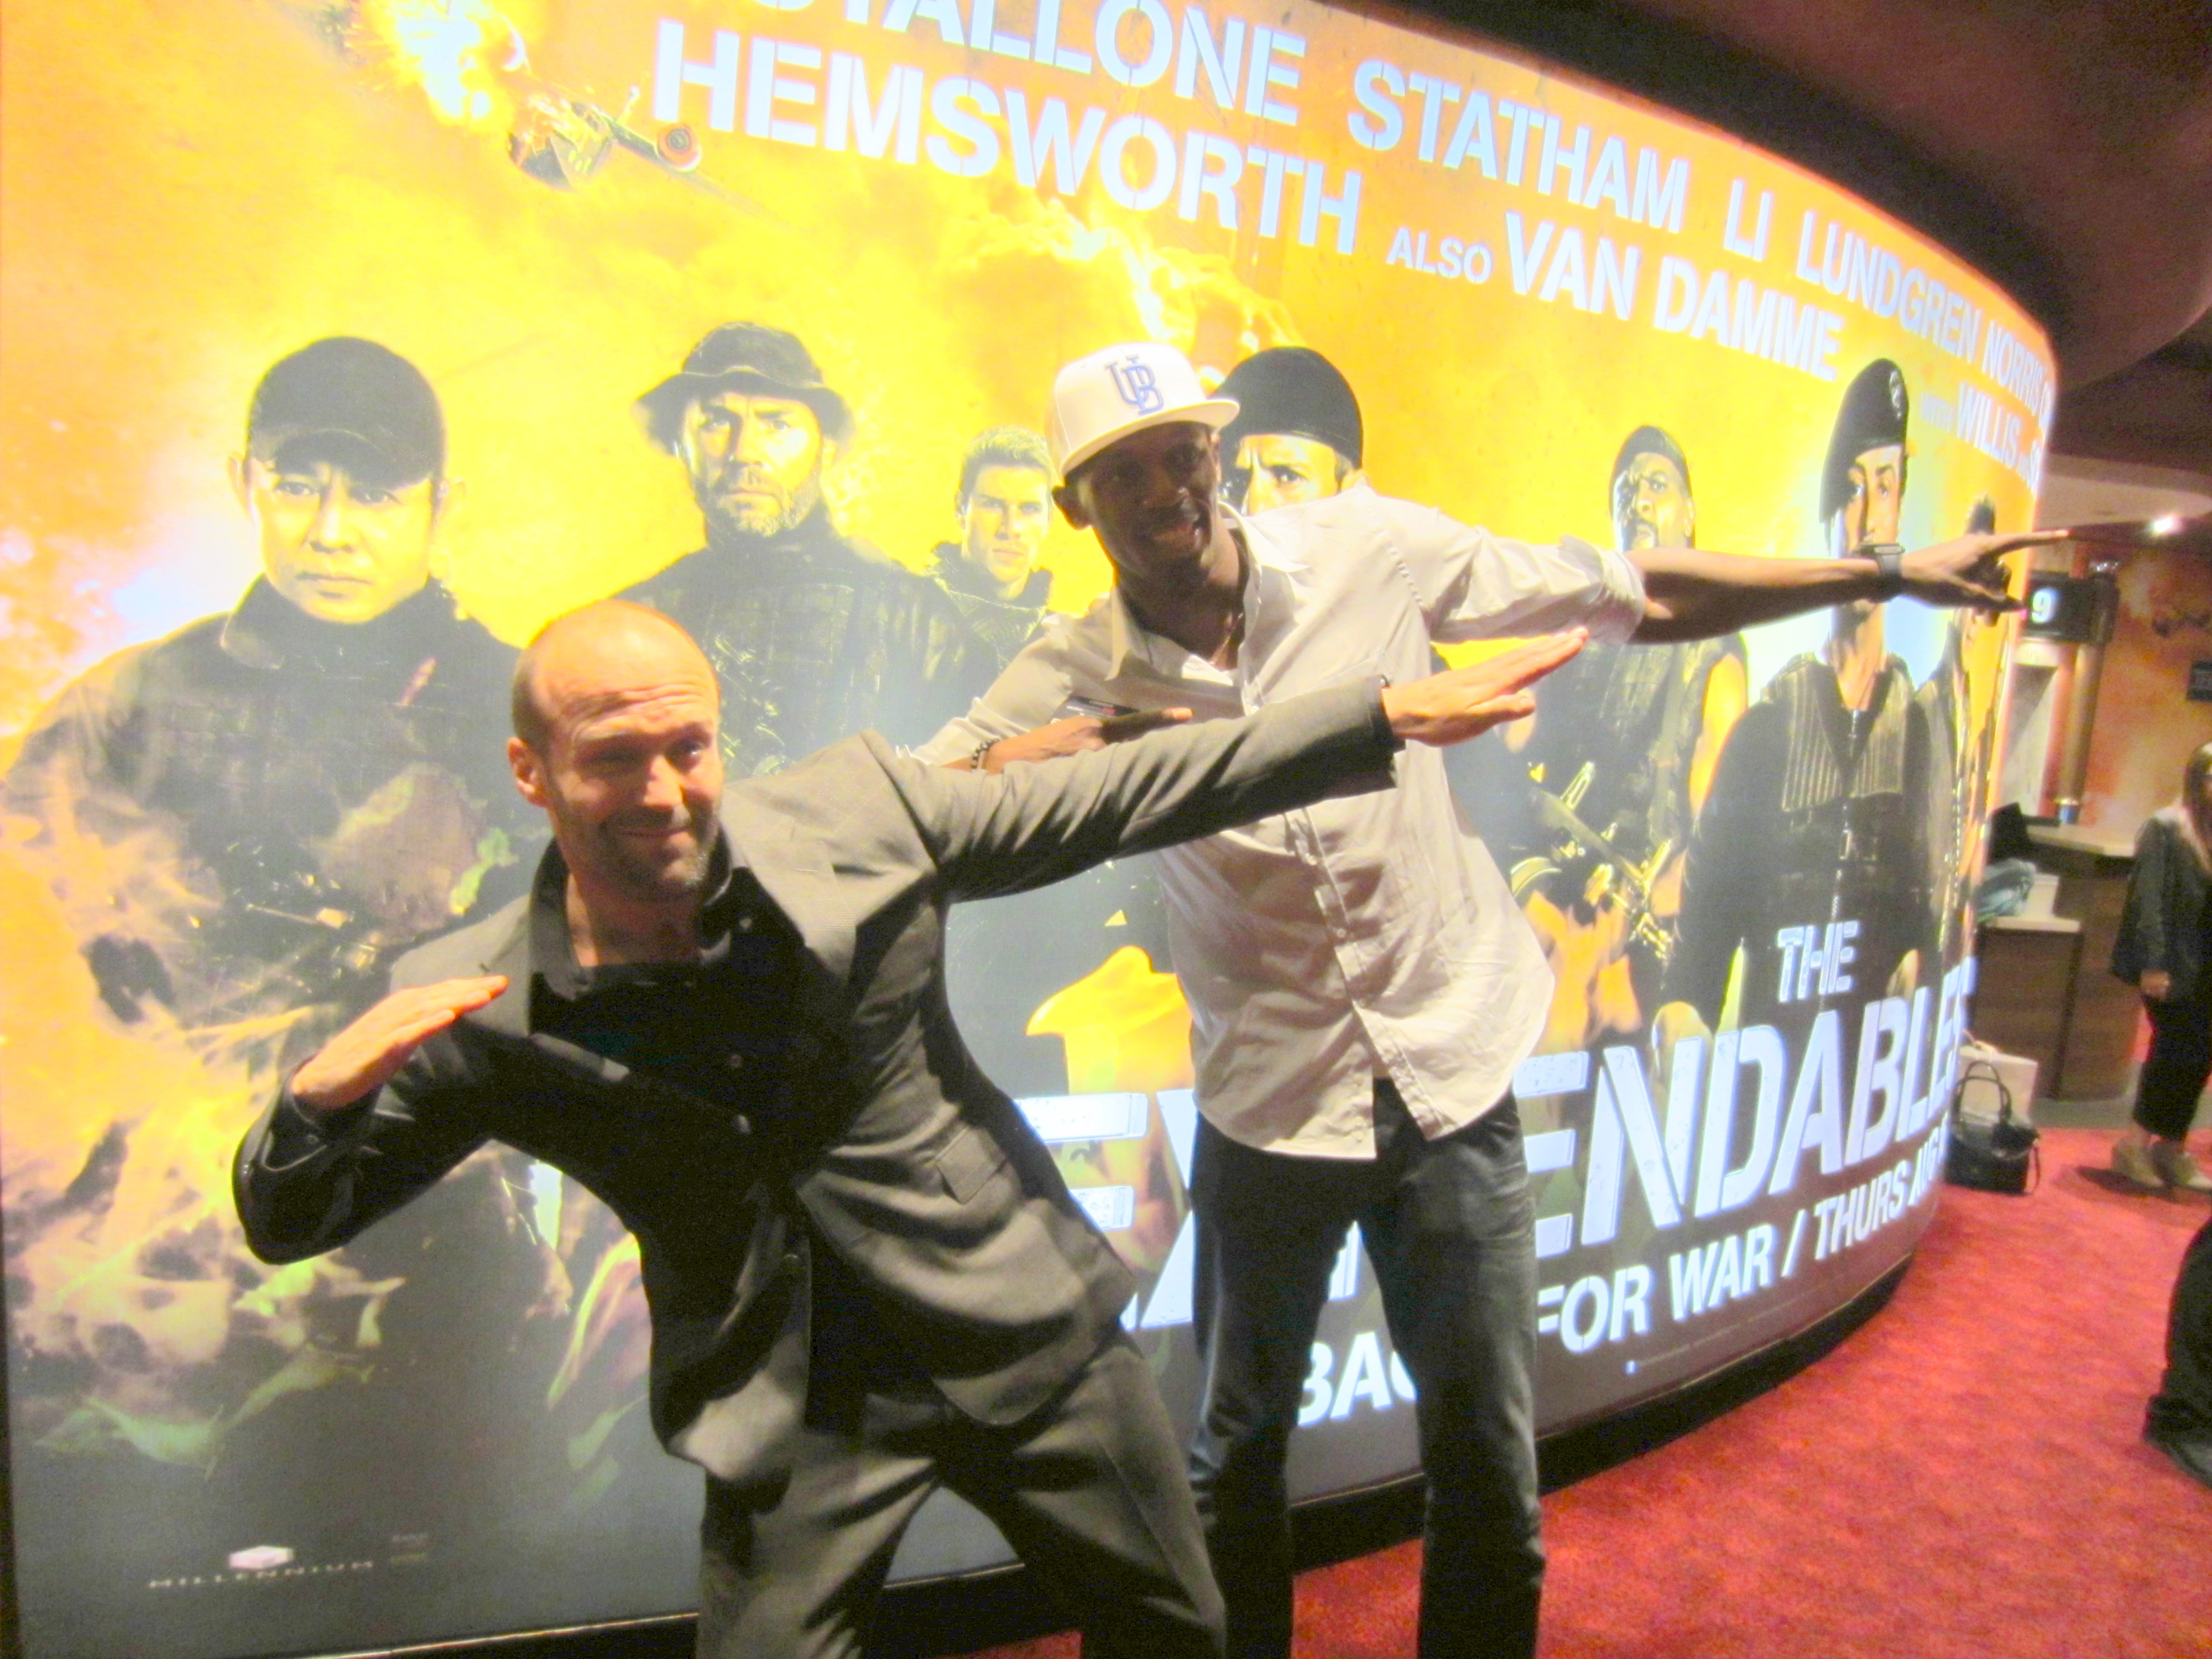 With Jason Statham at the Premier of The Expendables 2